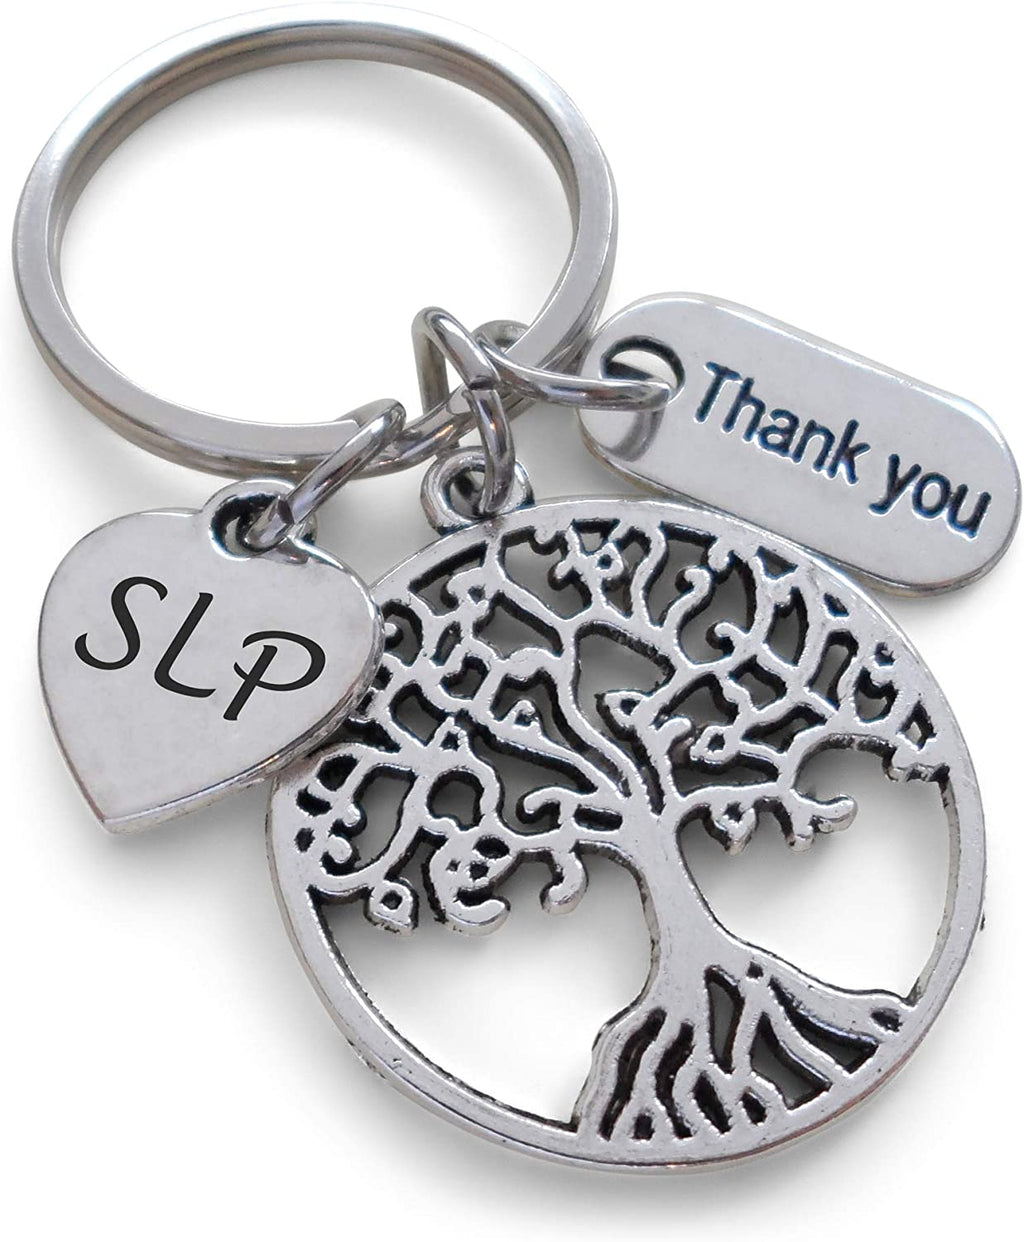 Employee Appreciation Gifts • Speech Therapist Keychain, Speech Language Pathologist Keychain with Tree, SLP Heart, and "Thank You" Tag w/ "Thanks for helping me grow" Card by JewelryEveryday